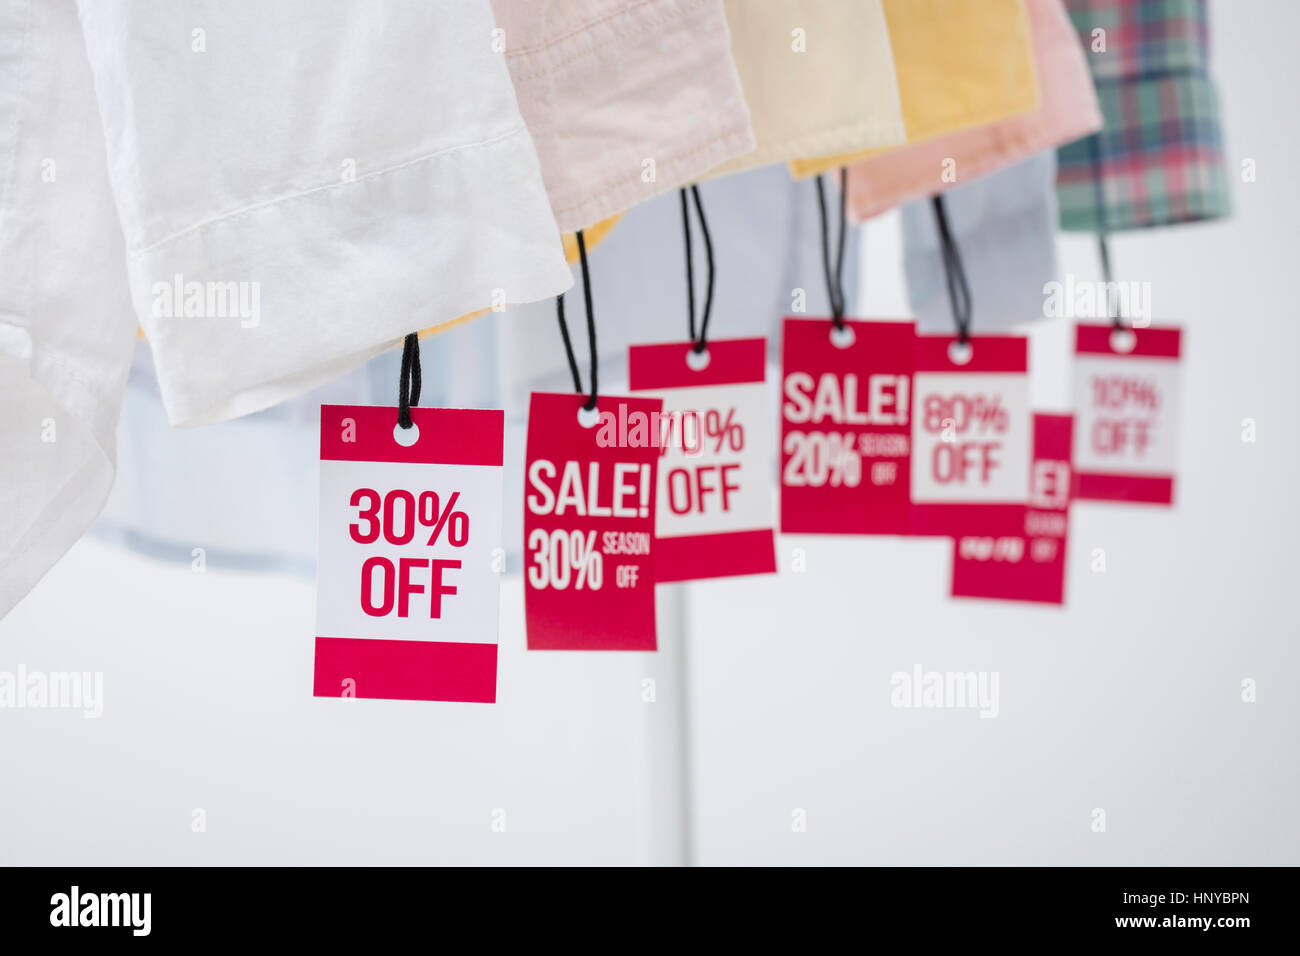 Black friday event in november, clothing store holding exclusive clearance  items offers with discounted clothes from various brands. Seasonal sales  marketing campaign with neon sign banners. 31408028 Stock Photo at Vecteezy